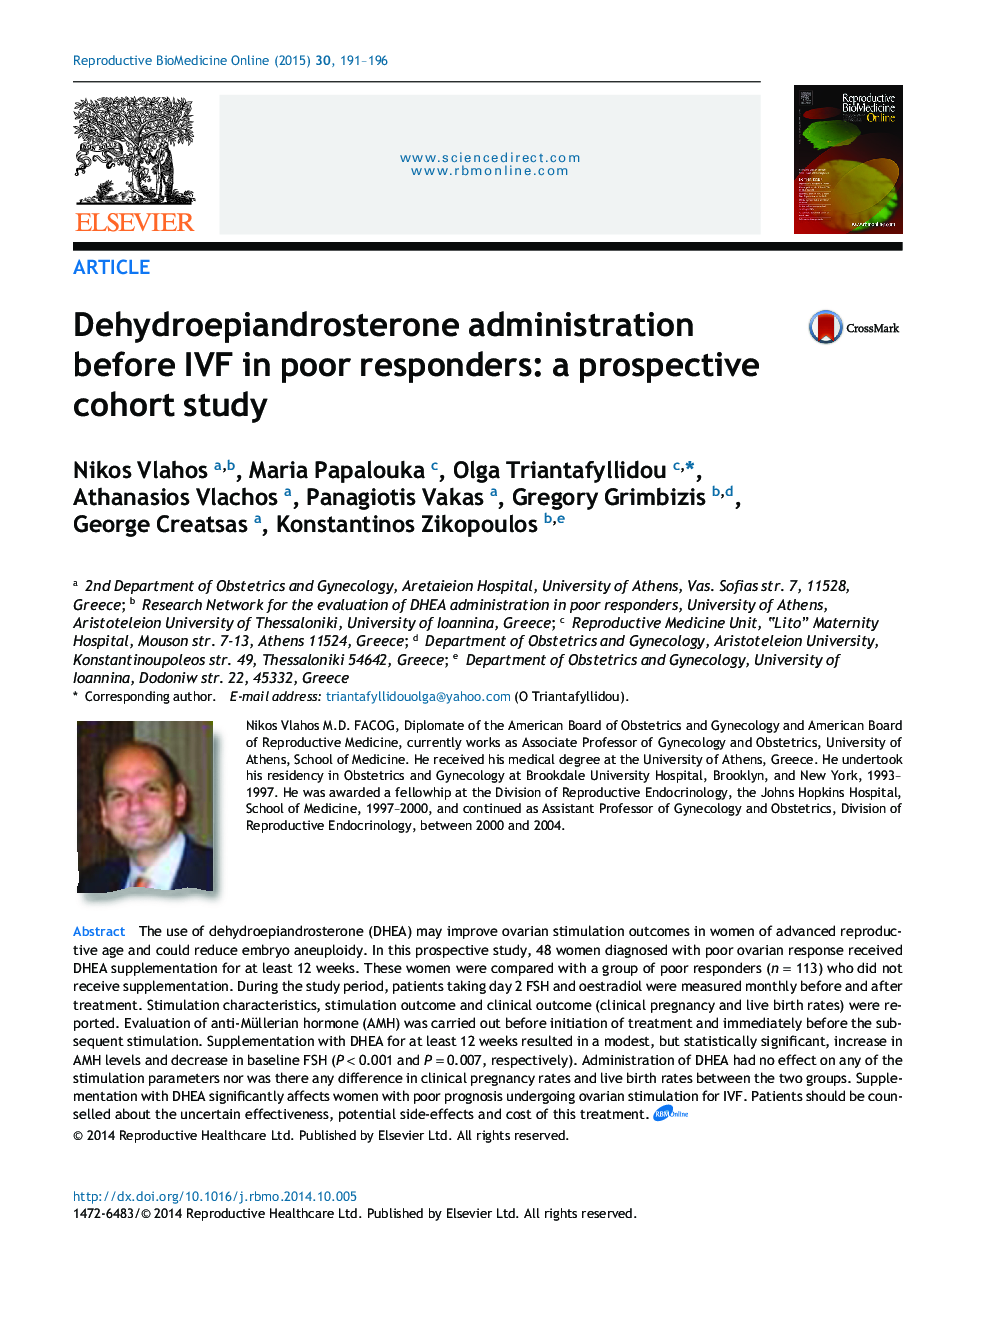 Dehydroepiandrosterone administration before IVF in poor responders: a prospective cohort study